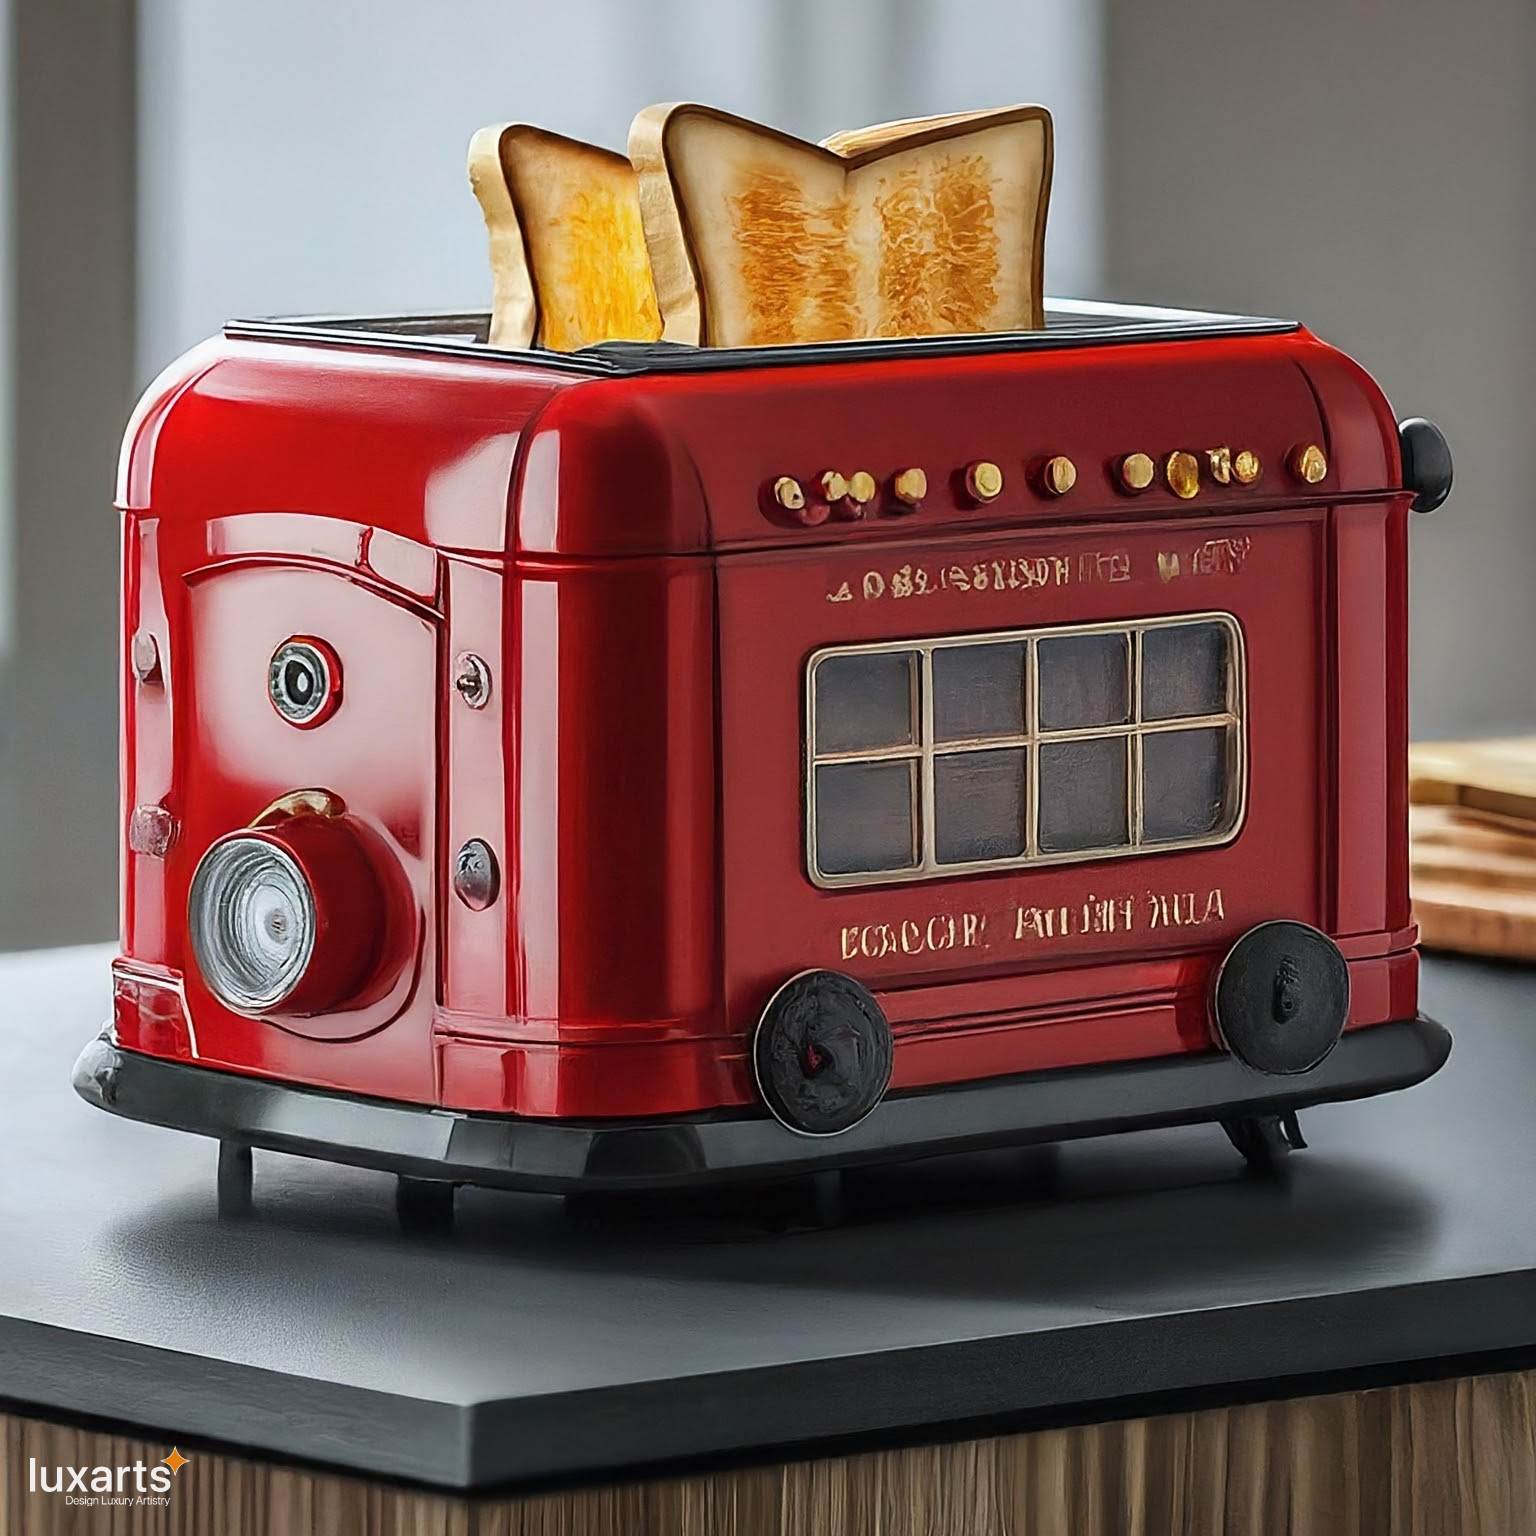 Fire Truck Shaped Toaster: Adding Fun to Your Kitchen luxarts fire truck toaster 4